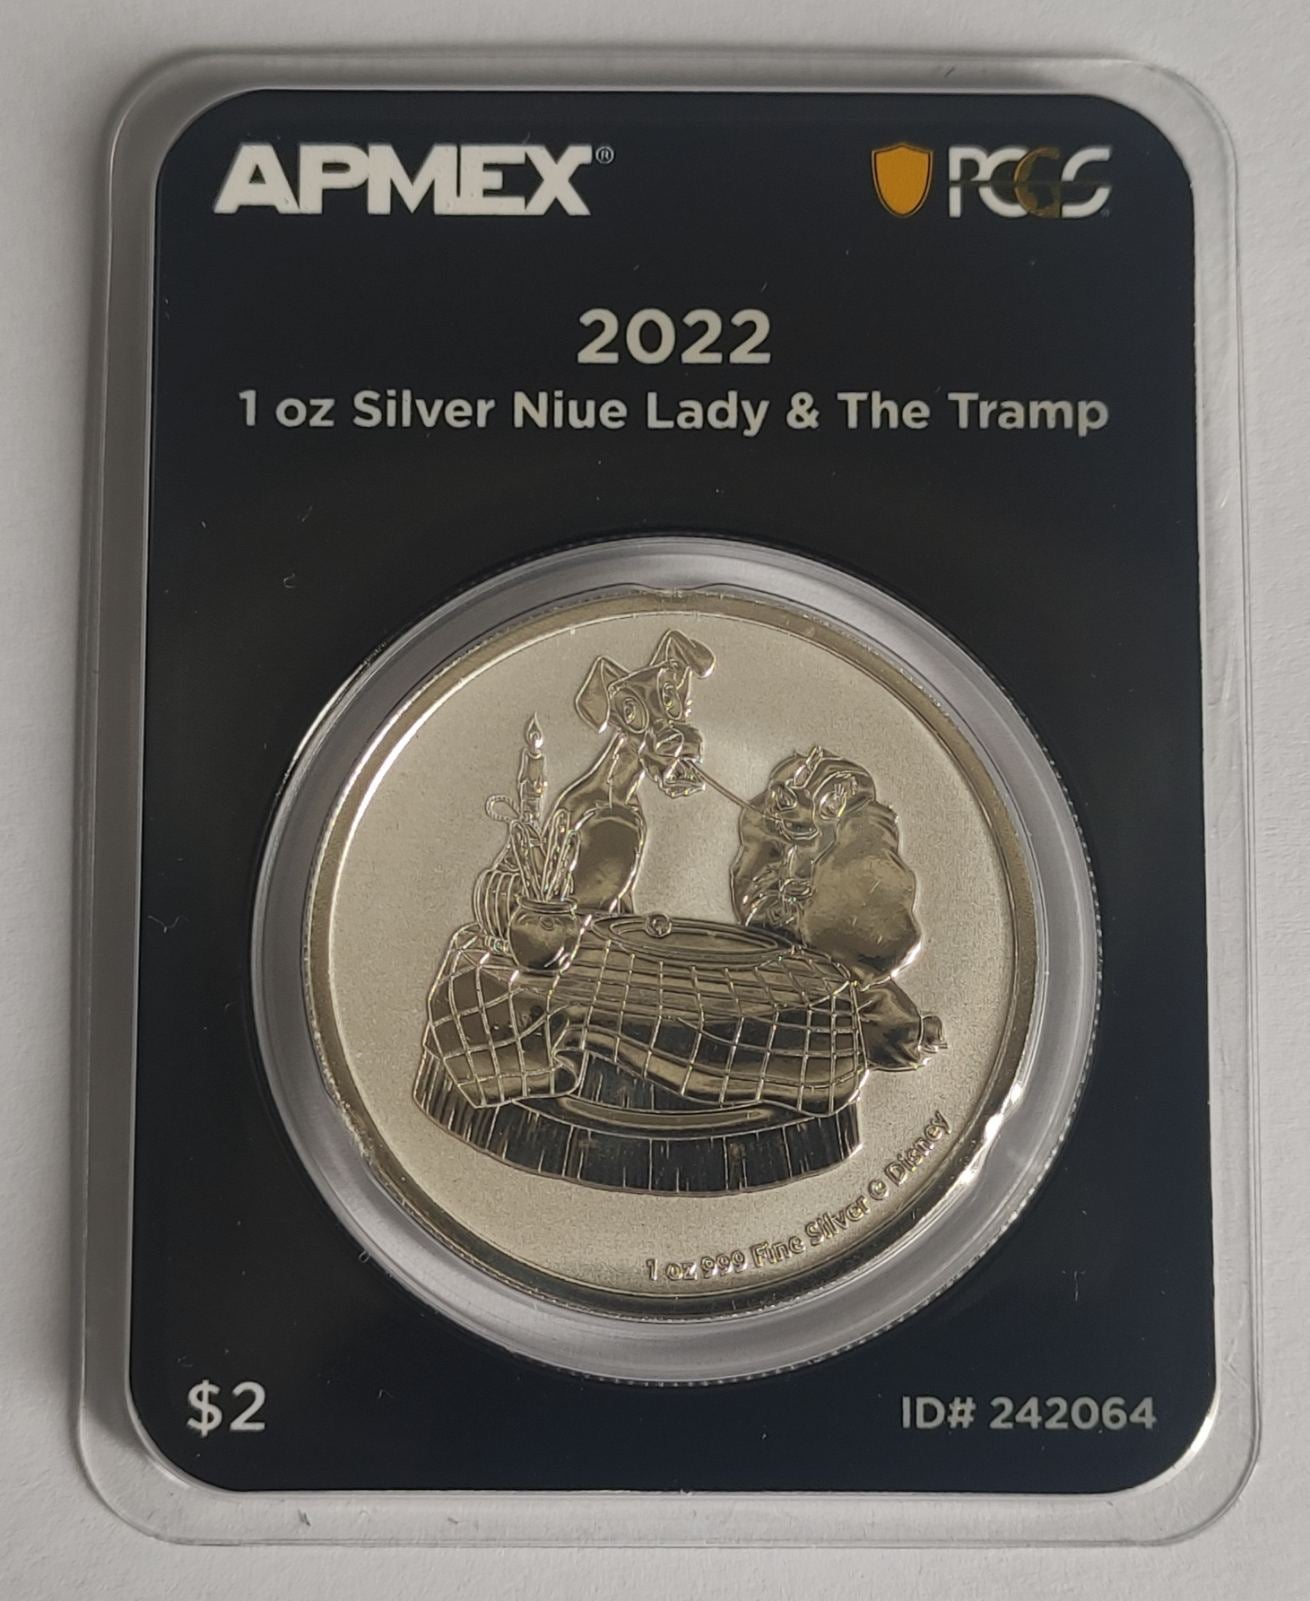 2022 Niue Lady and the Tramp 1 oz Silver Coin in MintDirect Premier Packaging + PCGS FirstStrike Eligible